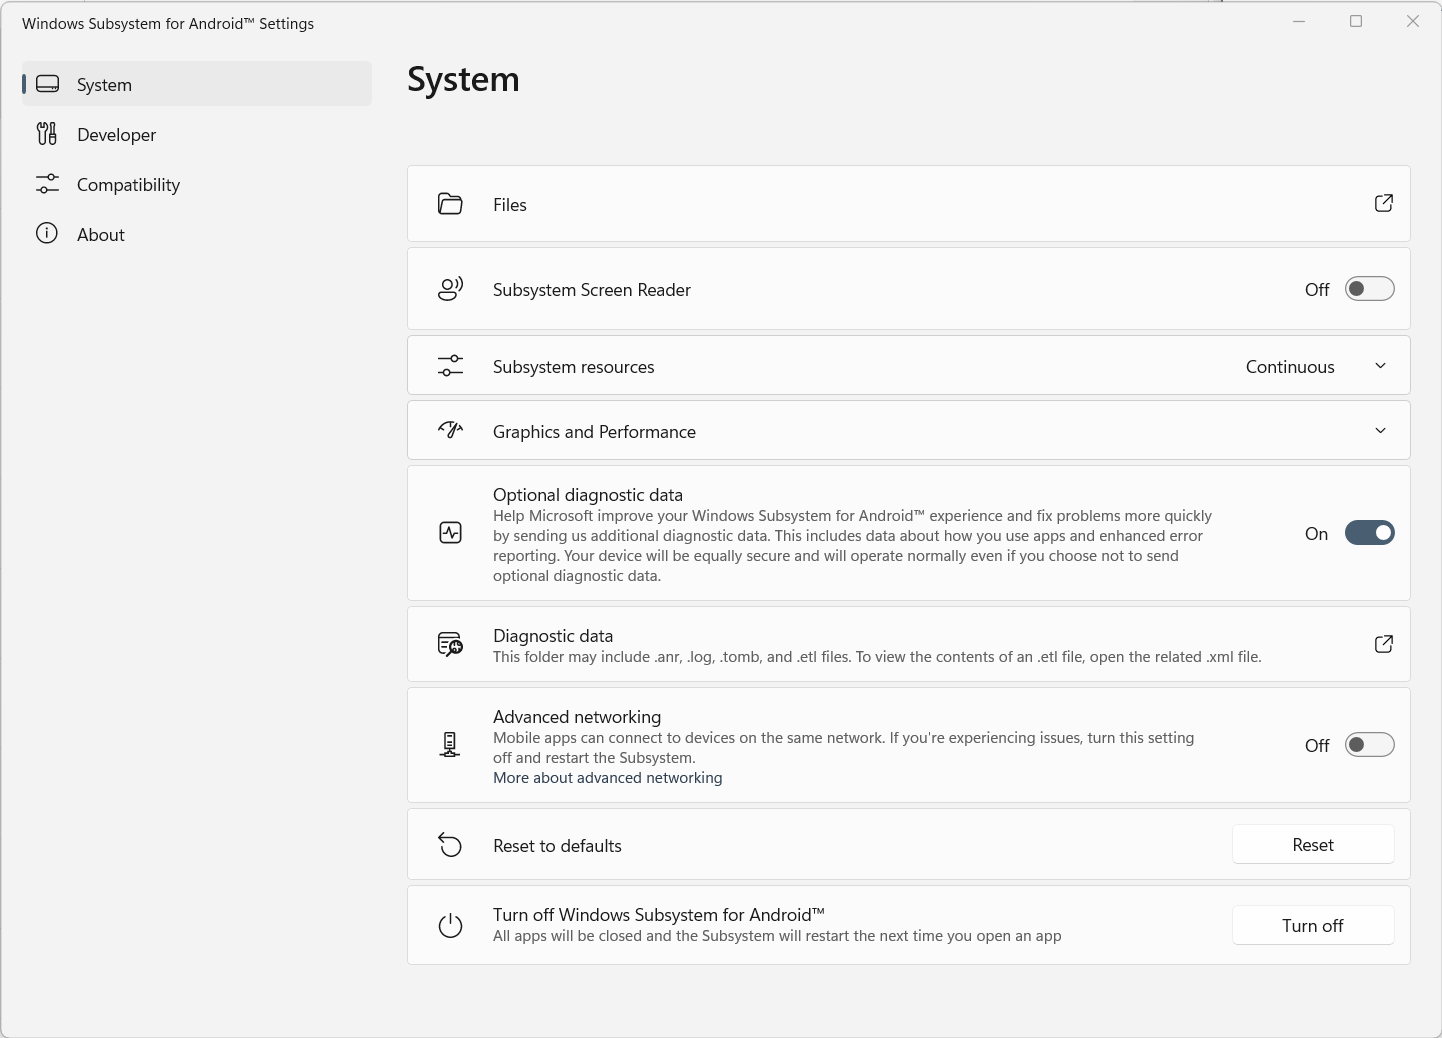 A screenshot of the Windows Subsystem for Android app.